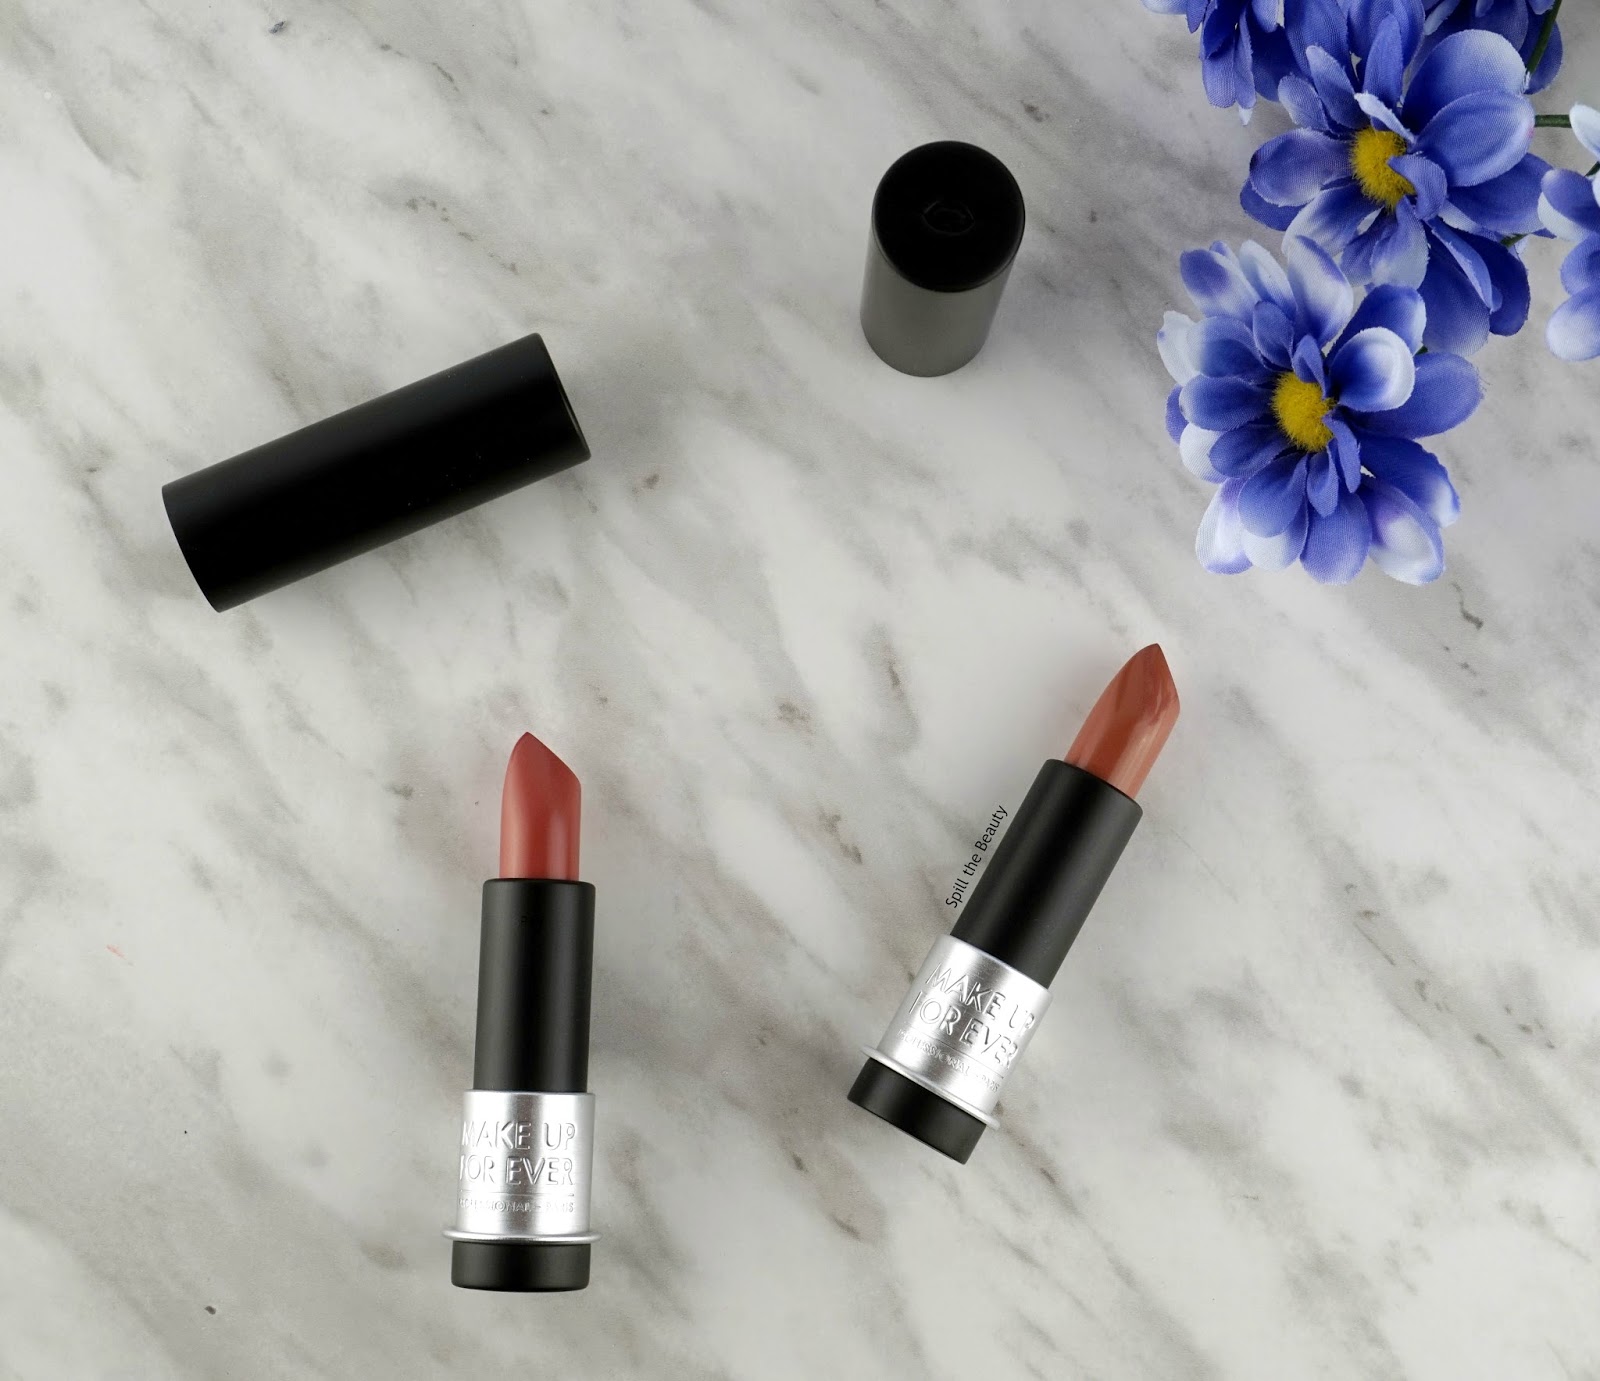 MAKE UP FOR EVER Artist Rouge Lipstick ‘M101’, ‘C211’ – Review, Swatches, and Look